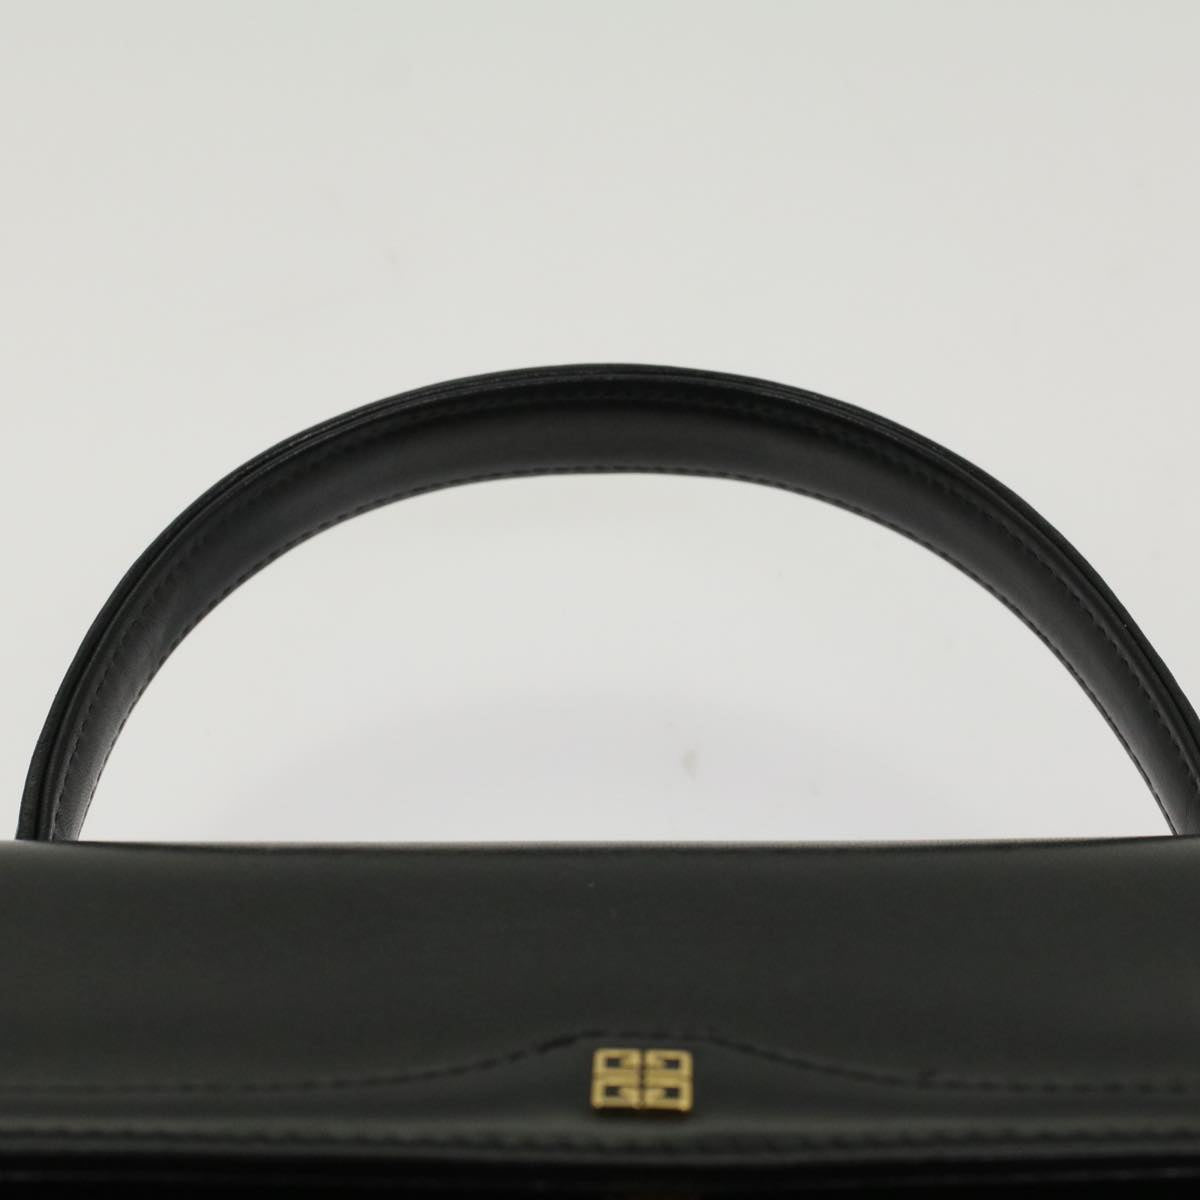 GIVENCHY Hand Bag Leather Black Auth am4887